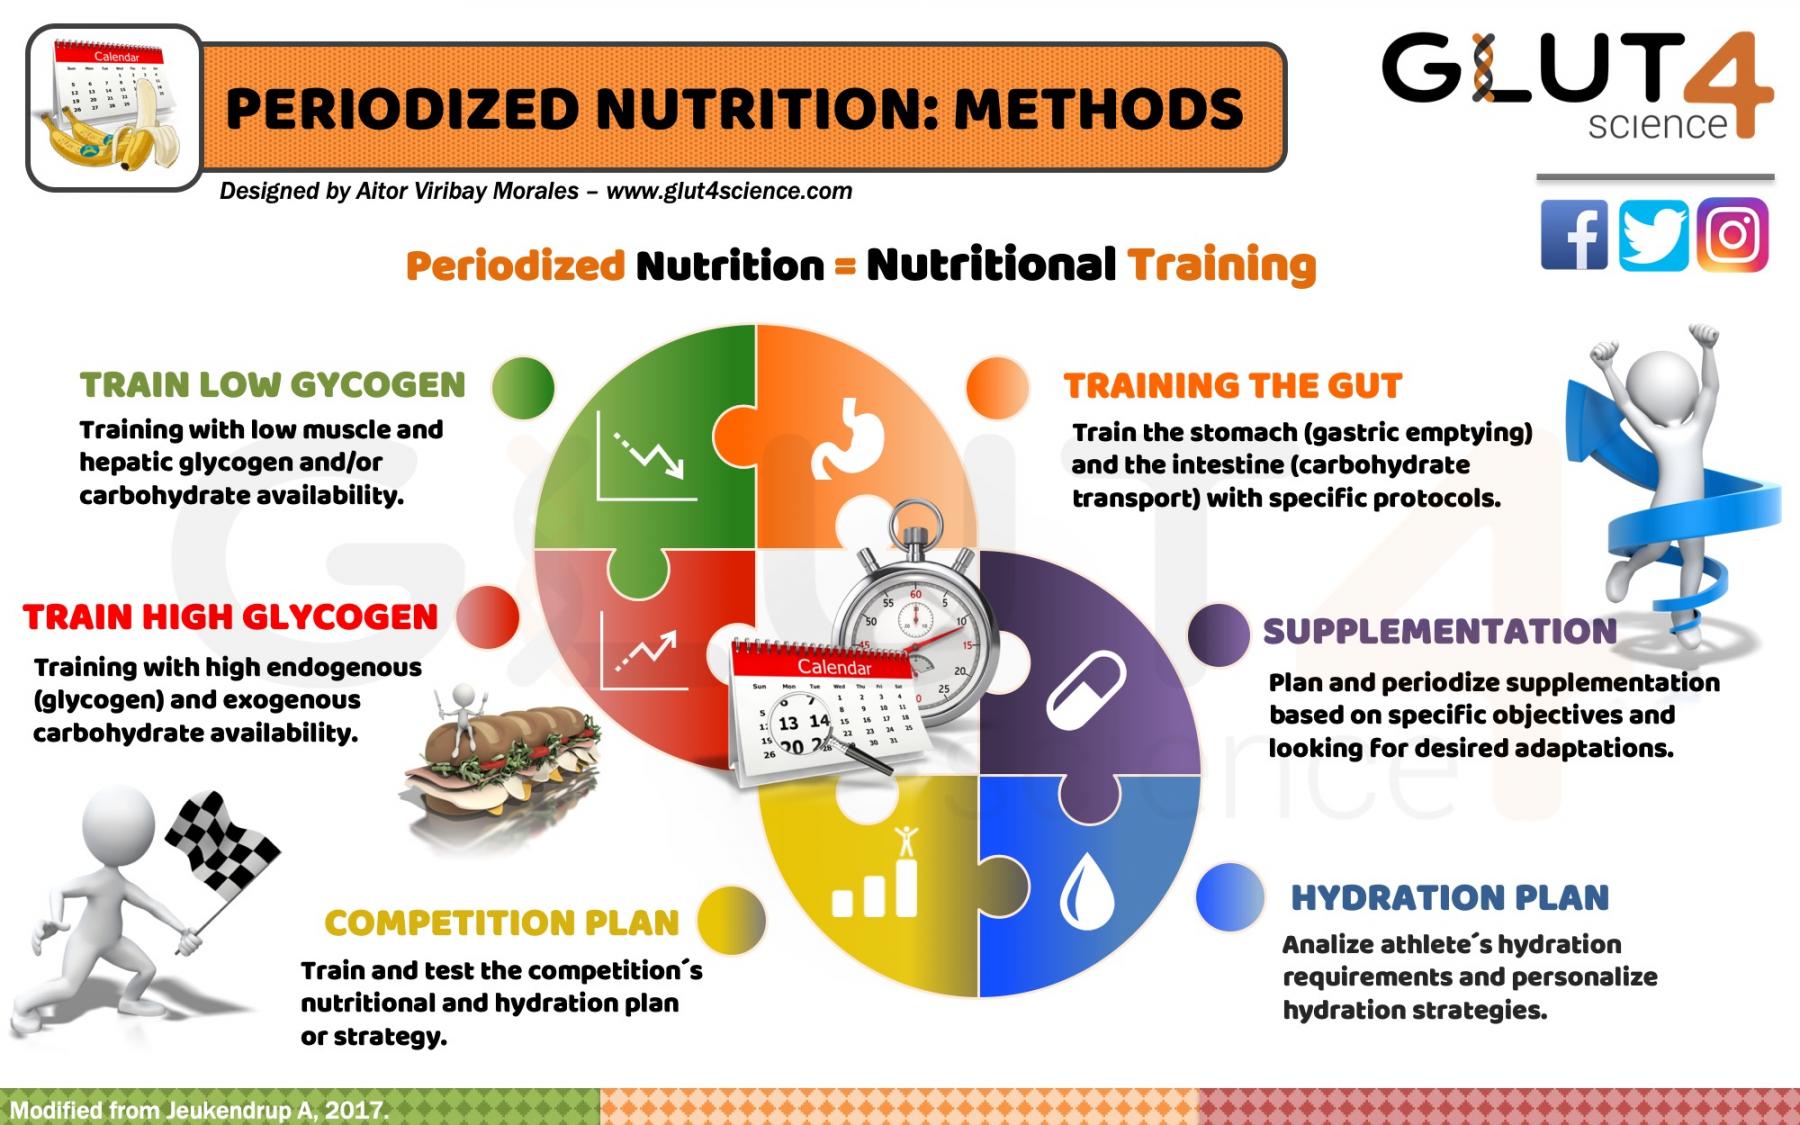 Methods of periodized nutrition in sport.